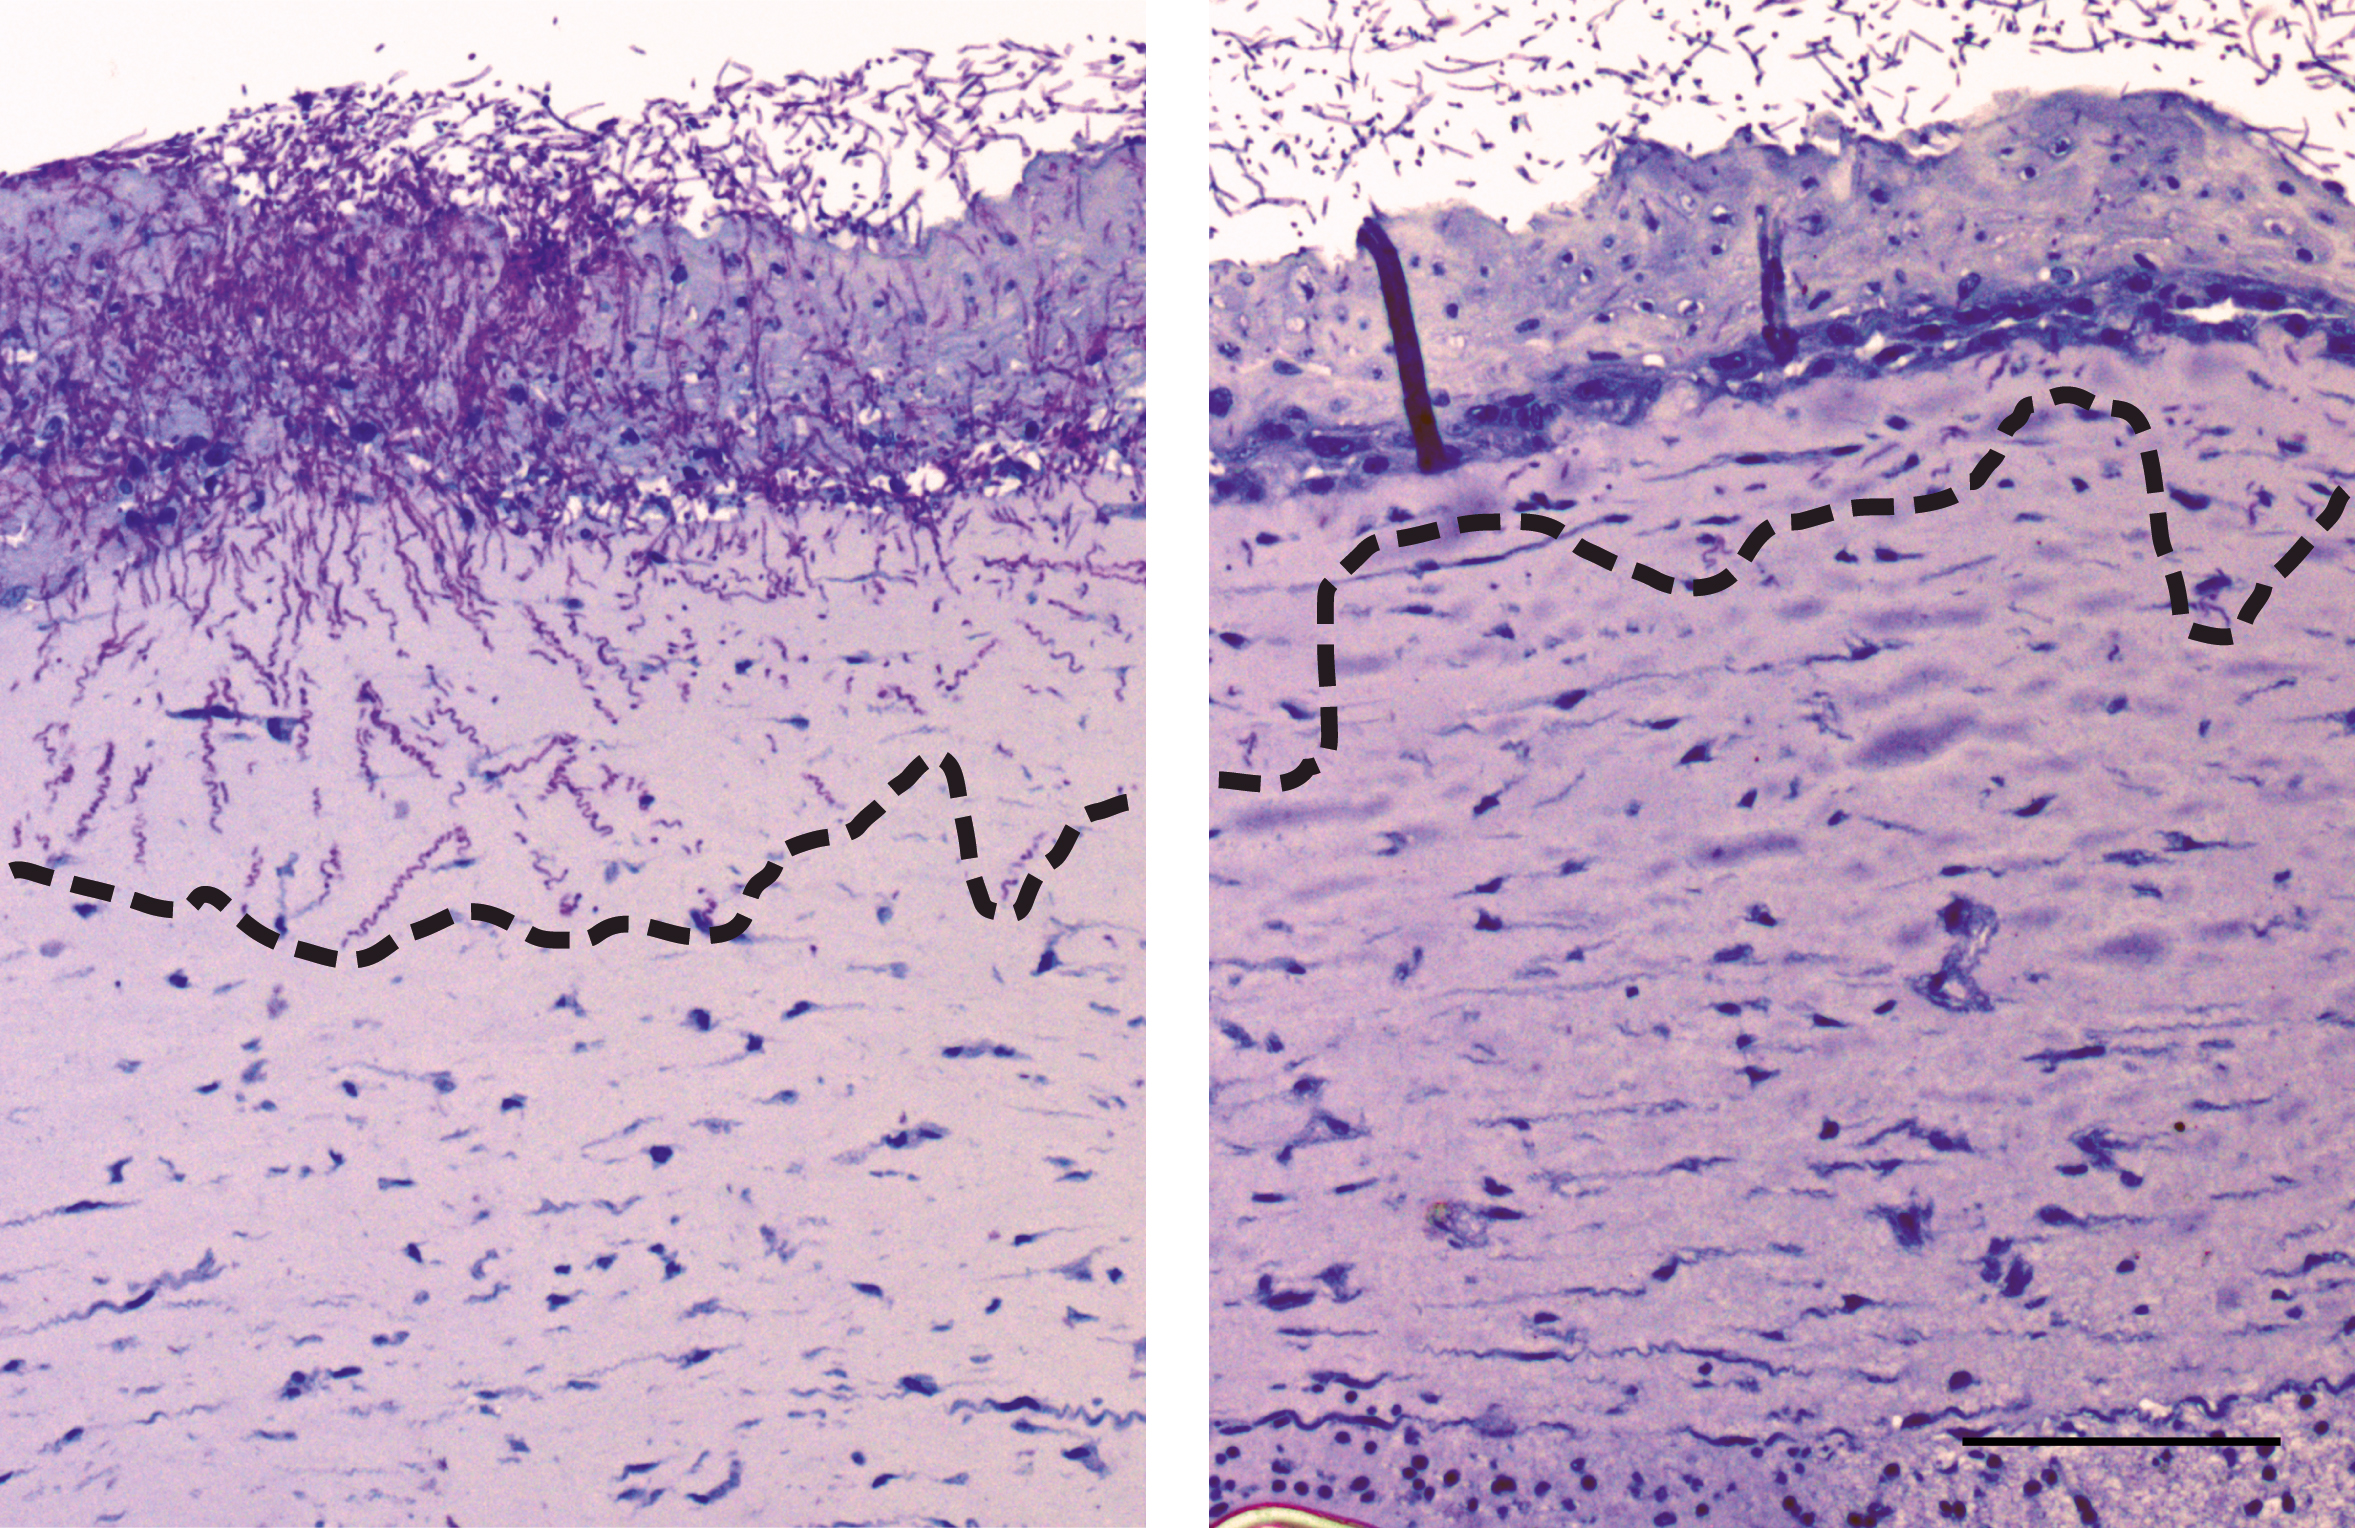 Infection of skin models with C. albicans in the presence (right) and absence (left) of immune cells.